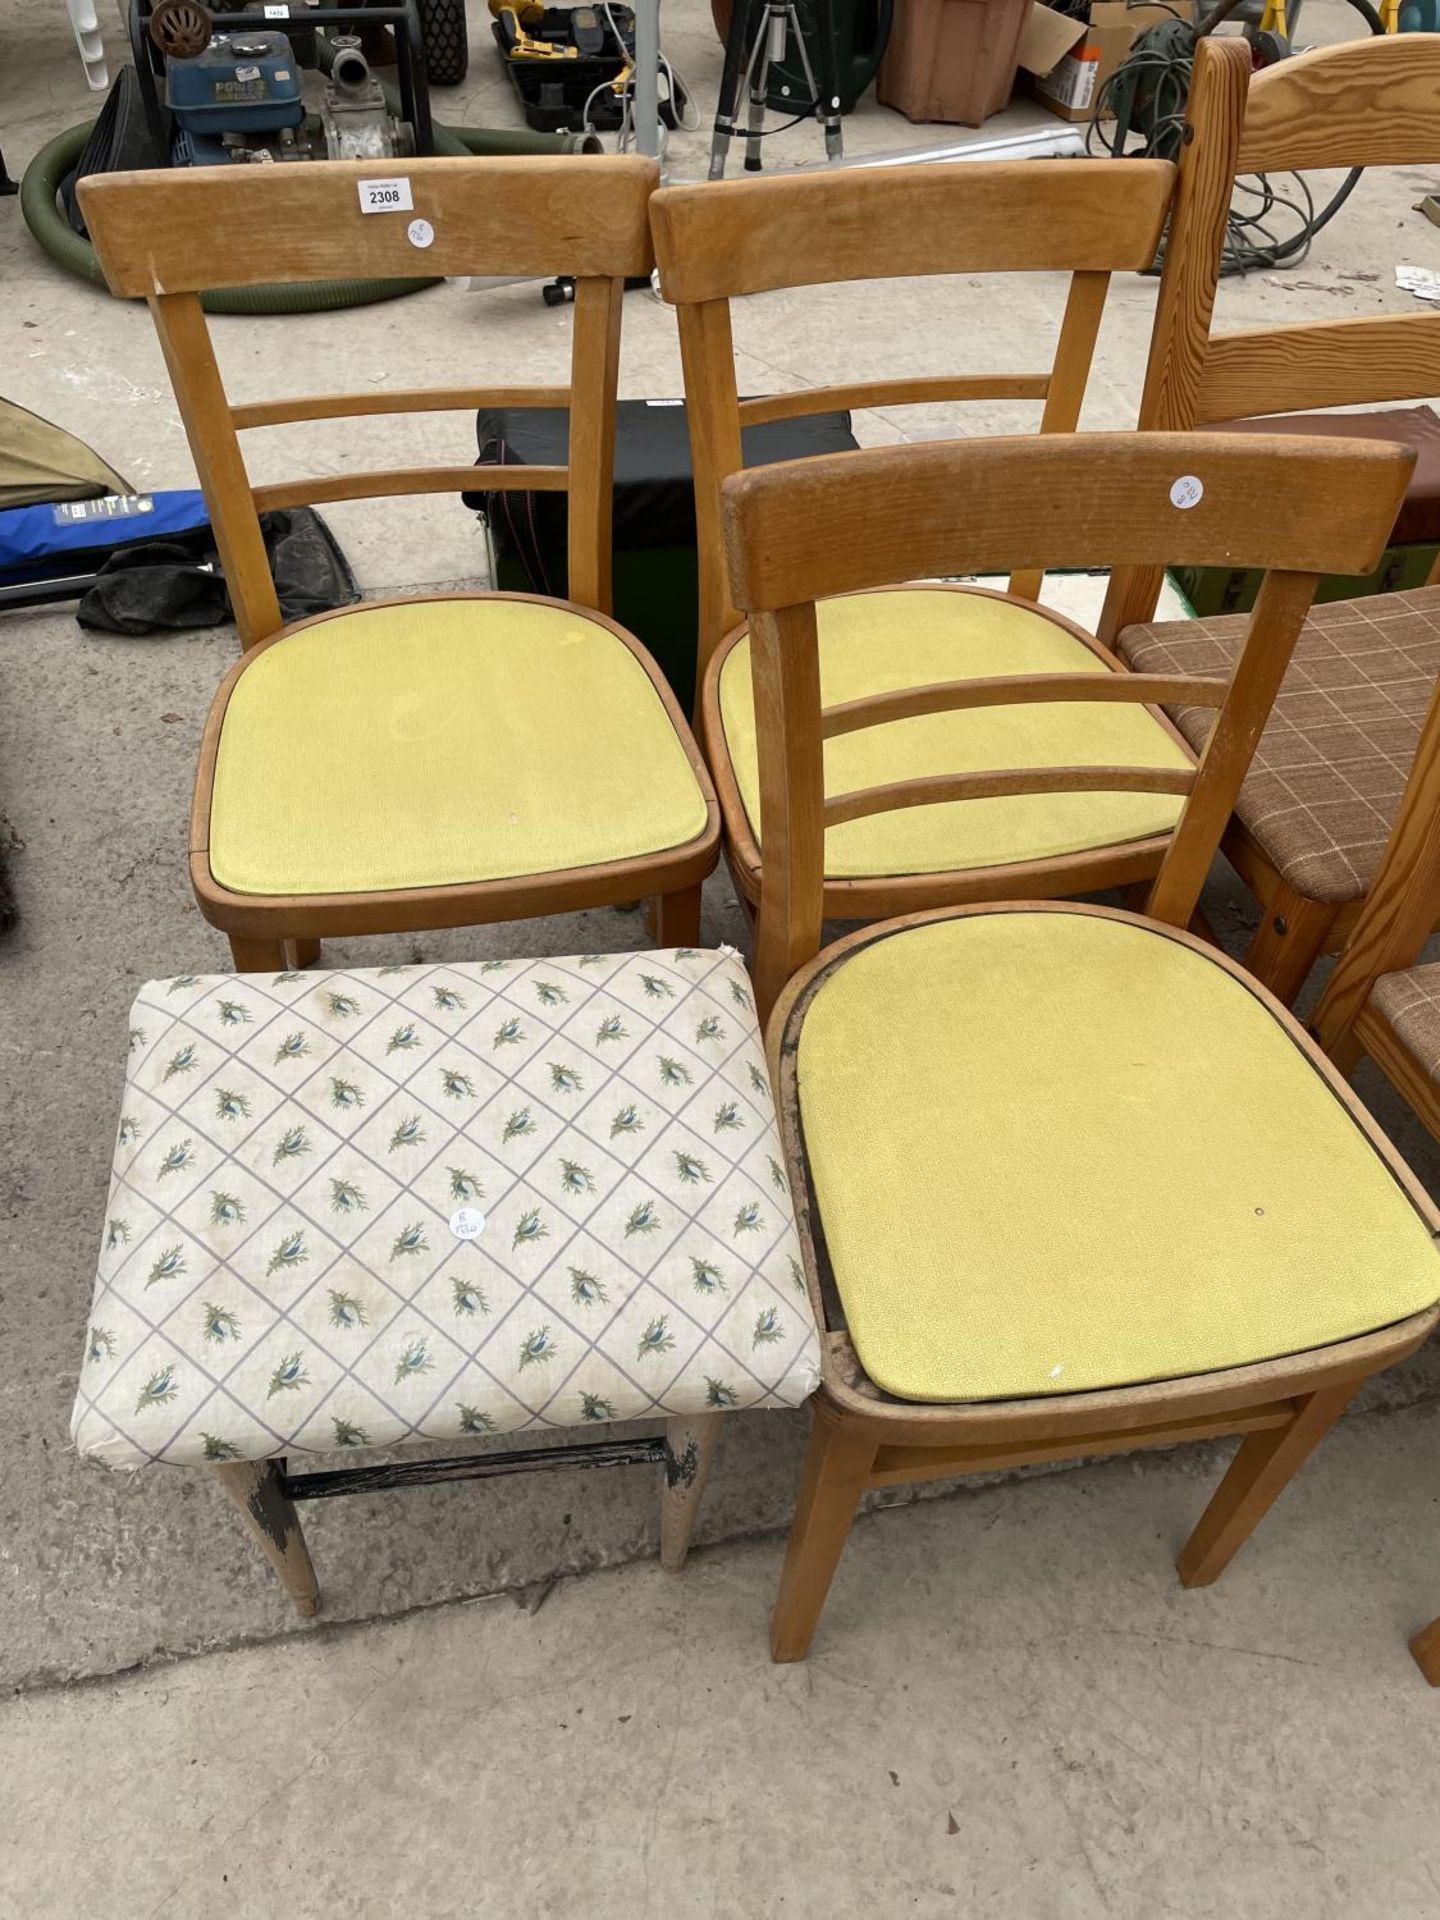 THREE MID 20TH CENTURY KITCHEN CHAIRS AND A STOOL